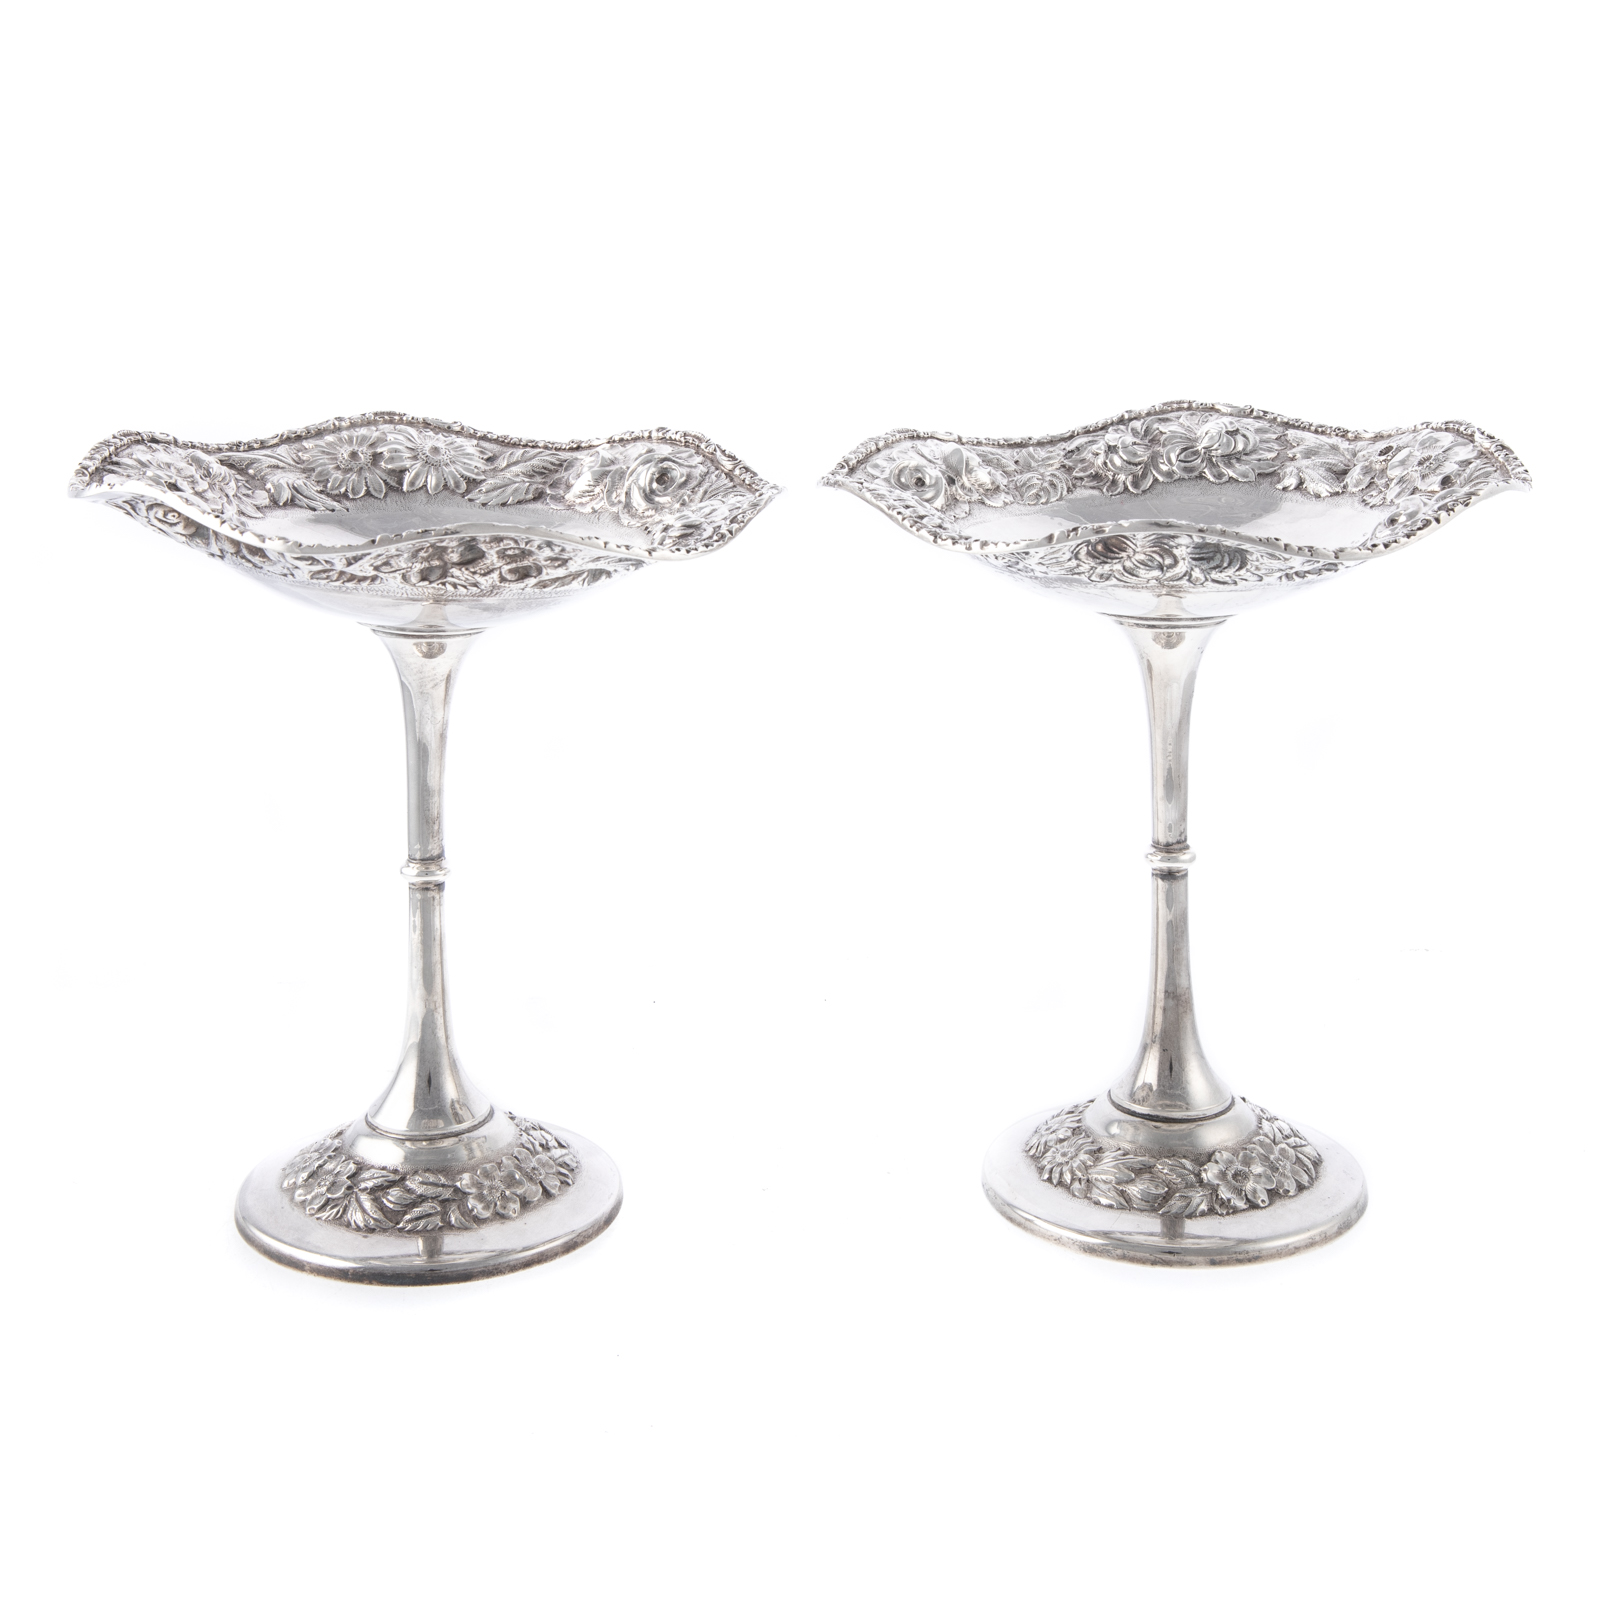 A PAIR OF STIEFF STERLING REPOUSSE 335922